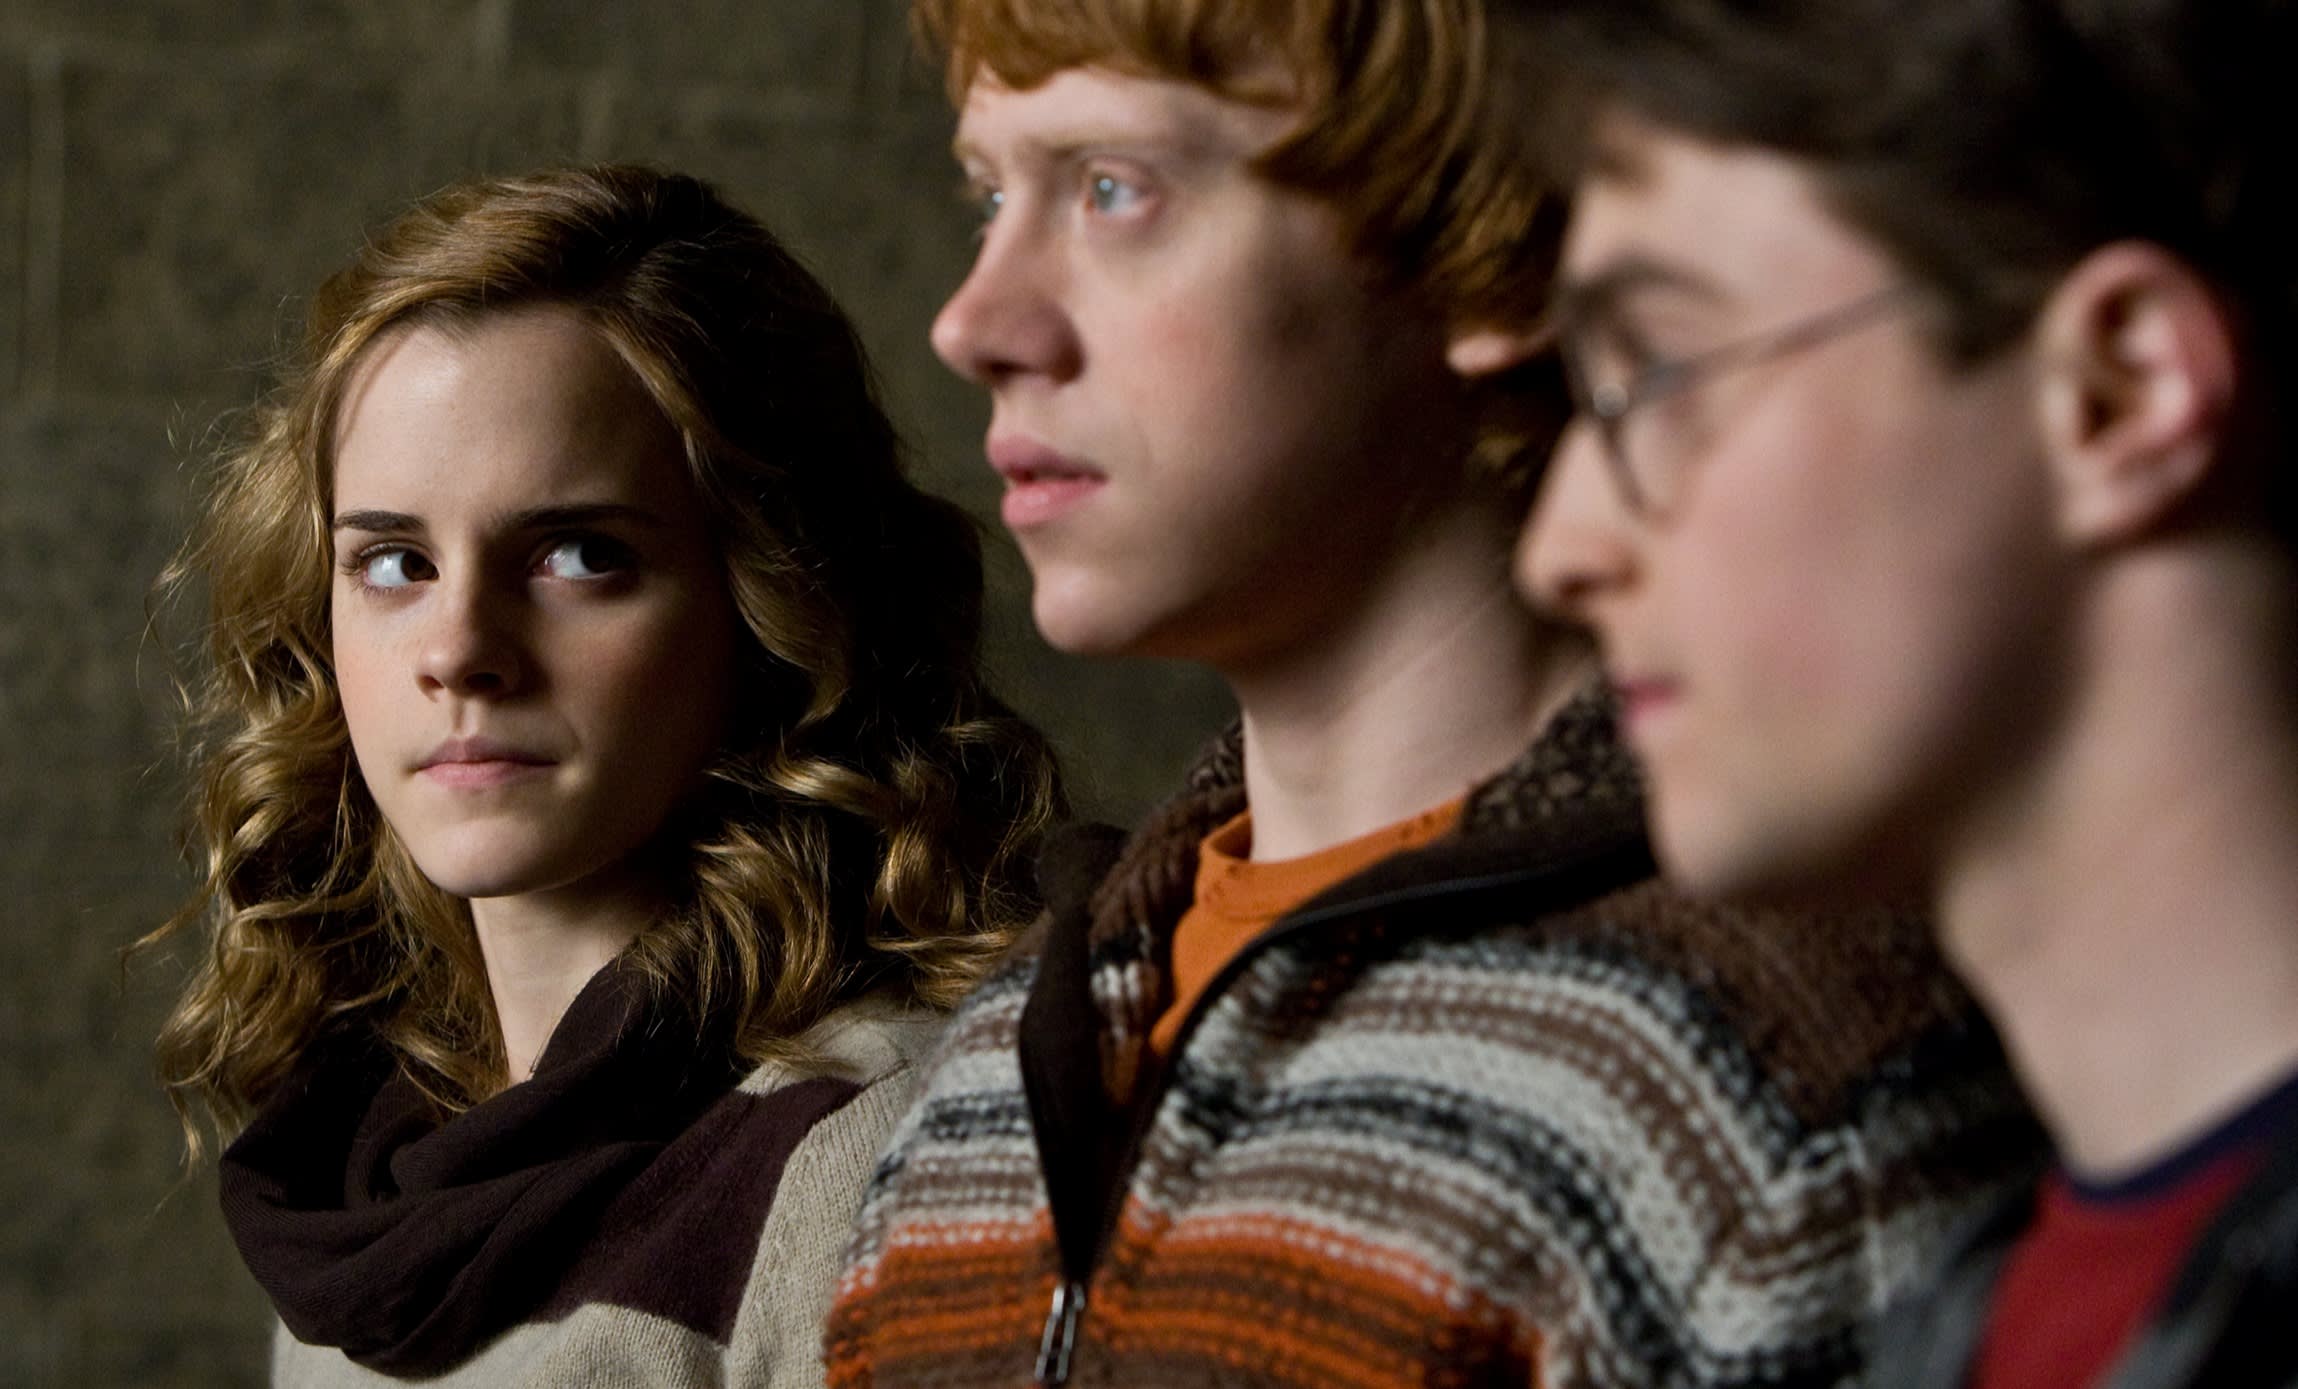 Harry, Ron and Hermione in Harry Potter and the Half-Blood Prince